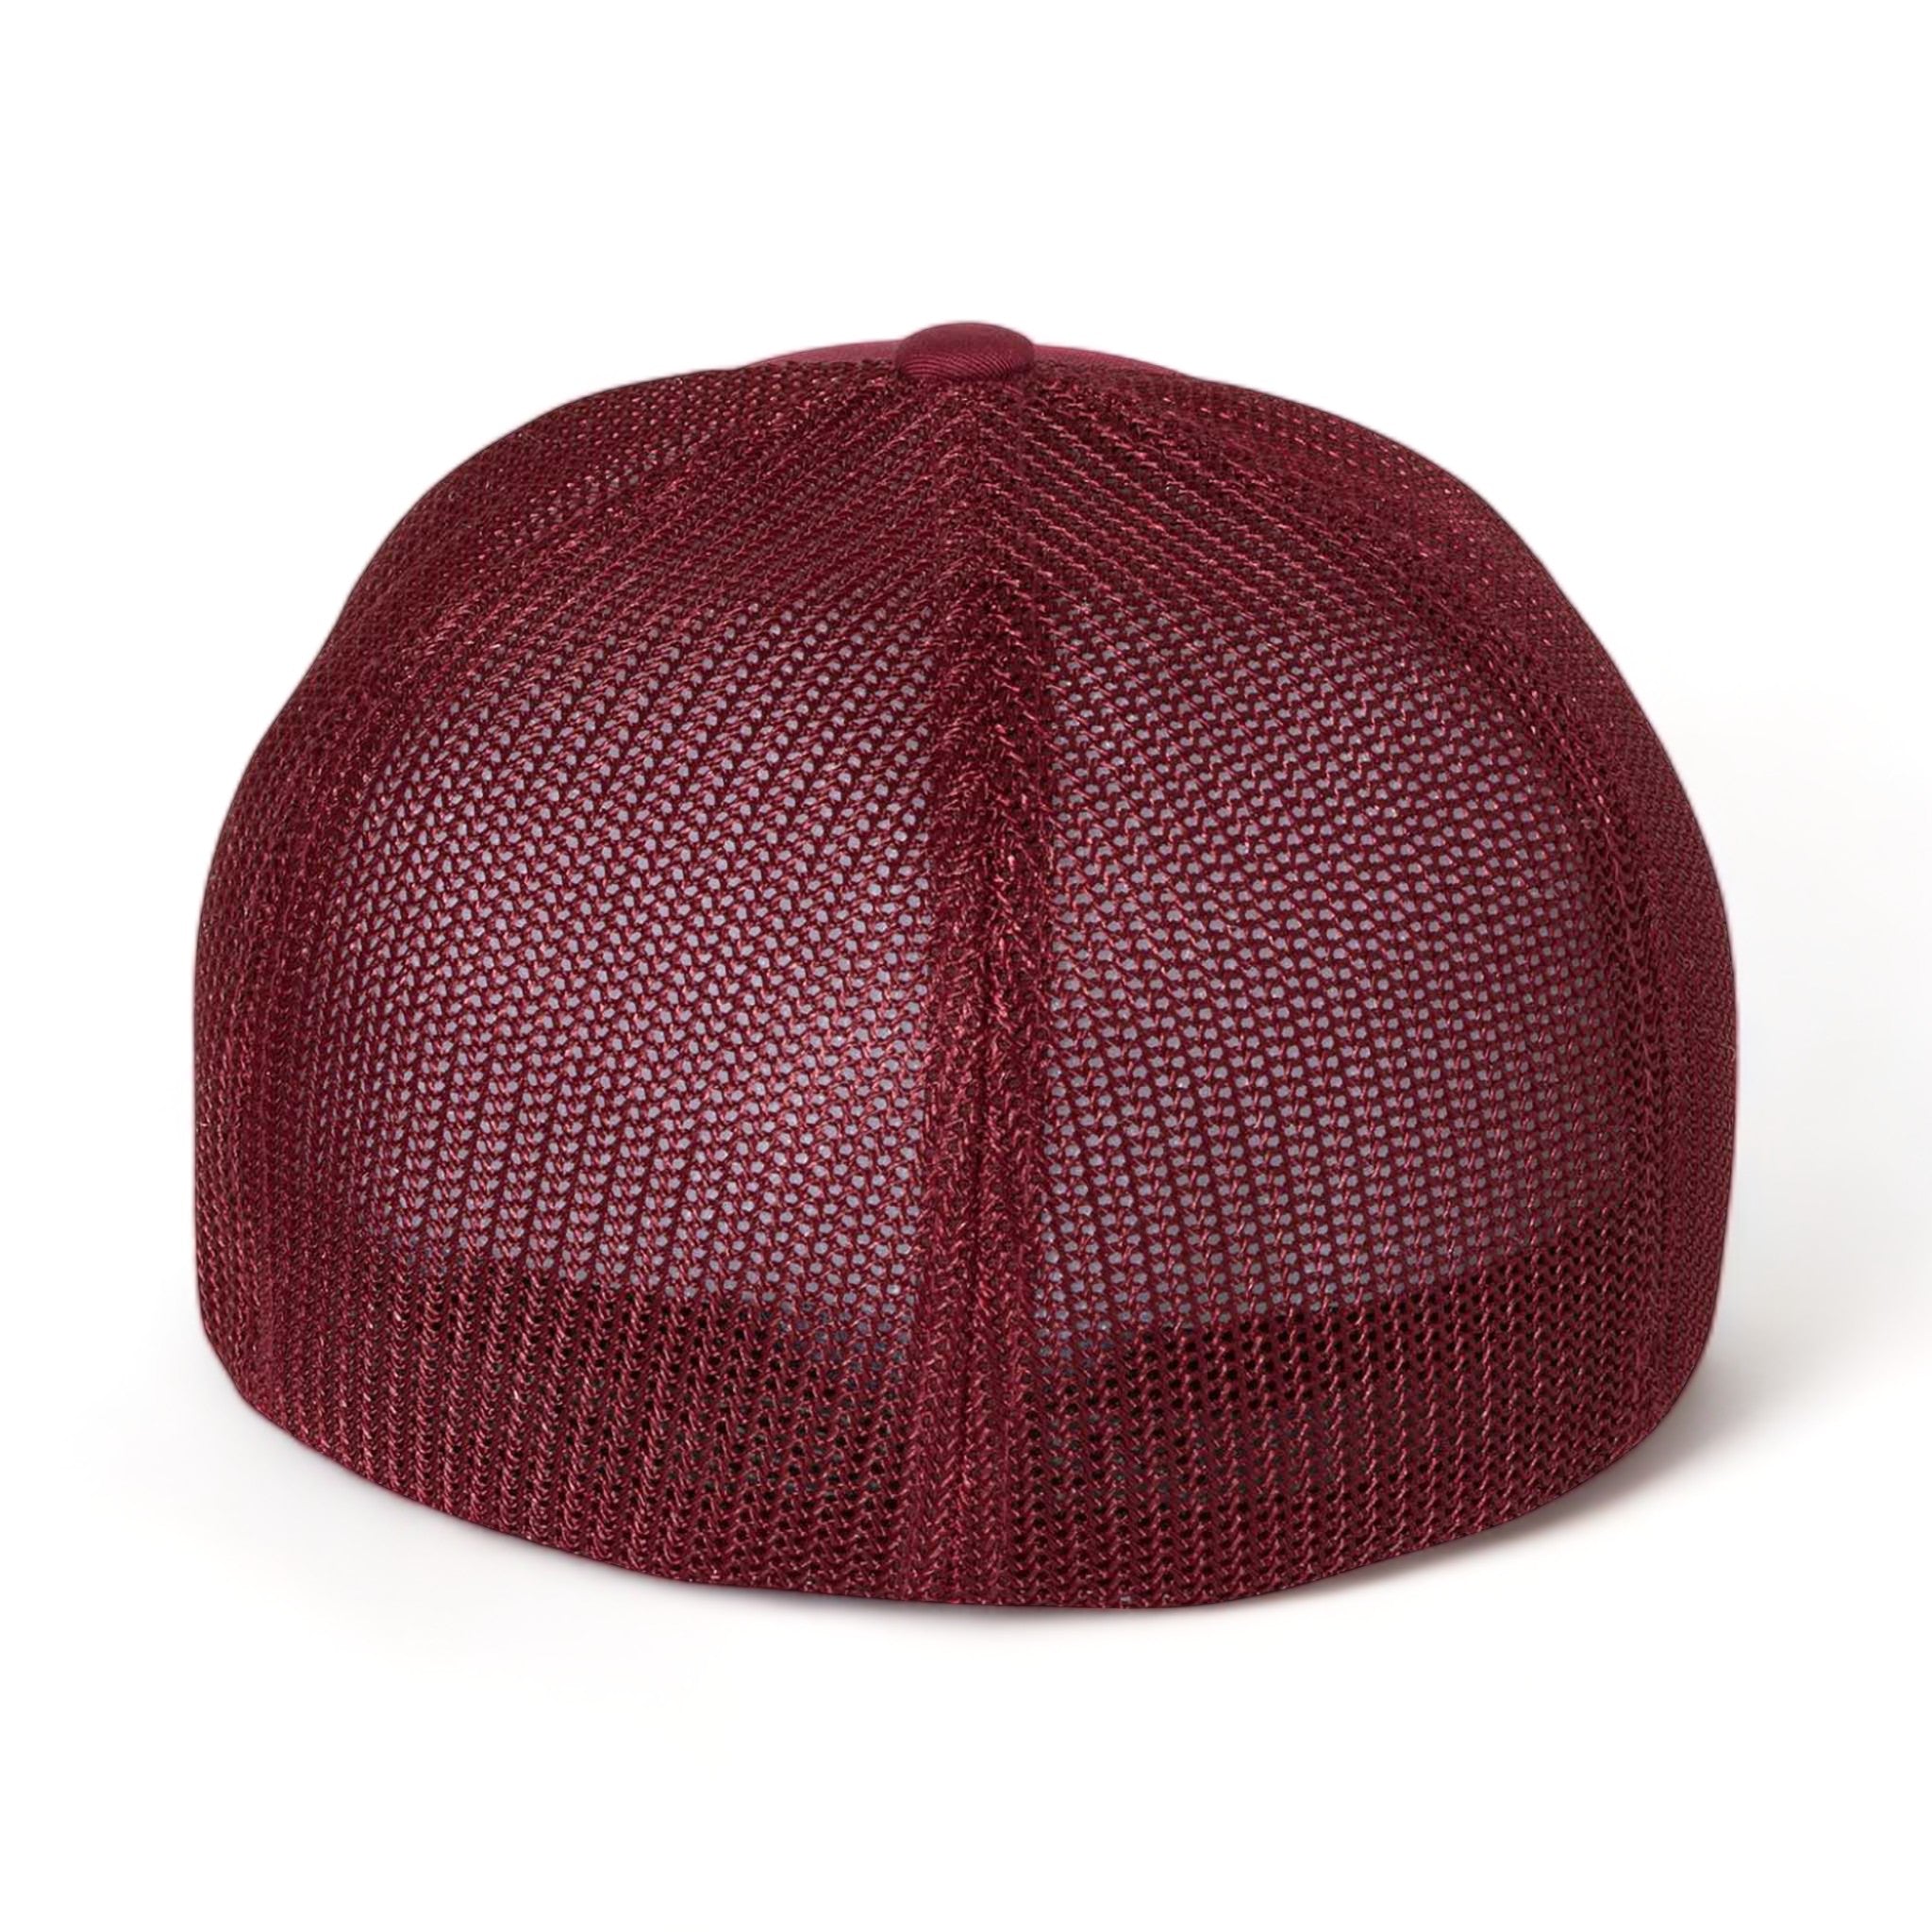 Back view of Flexfit 6511 custom hat in cranberry